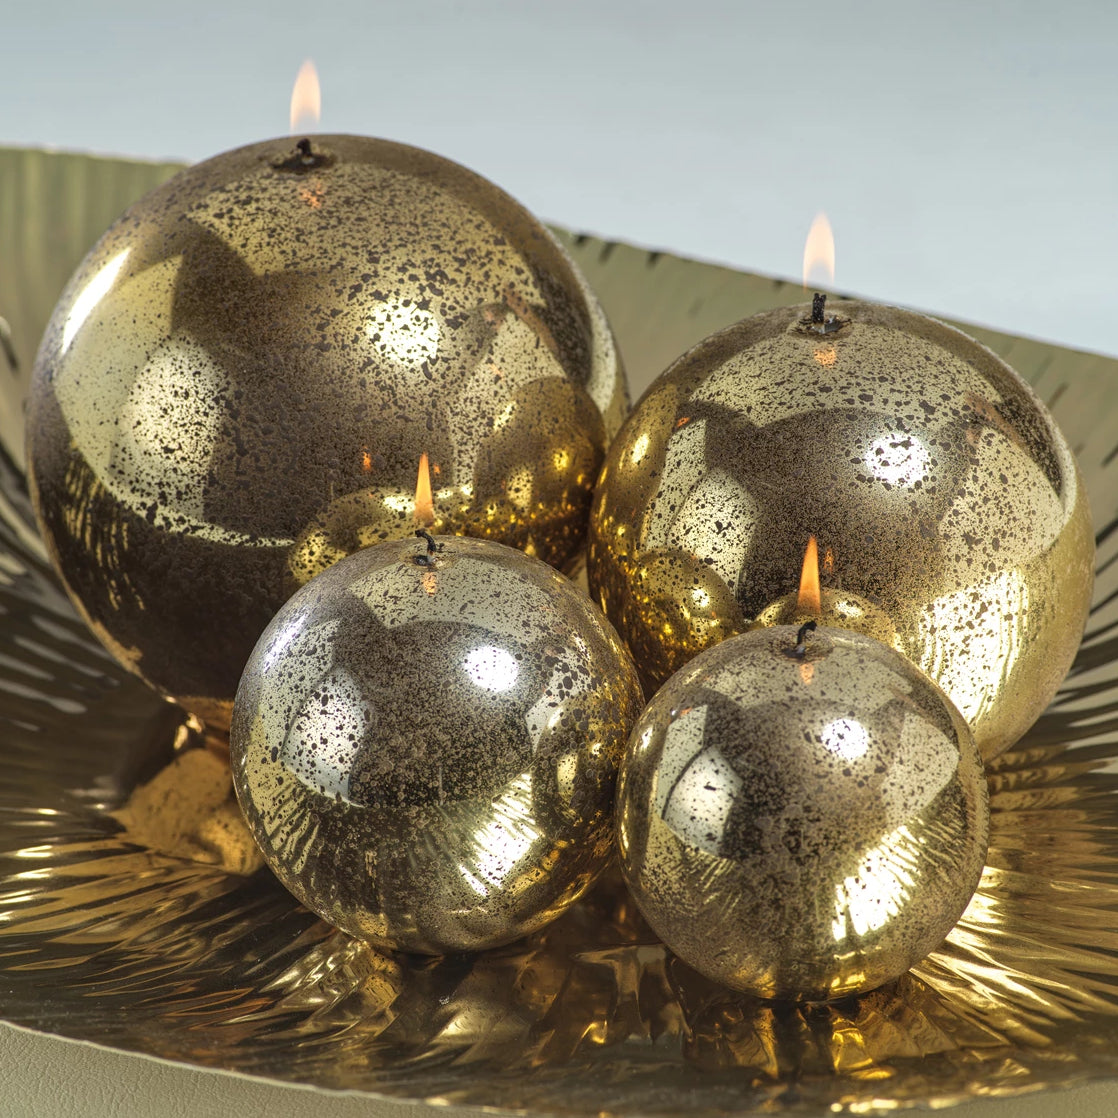 Shiny Metallic Ball Candle - Antique Gold - CARLYLE AVENUE